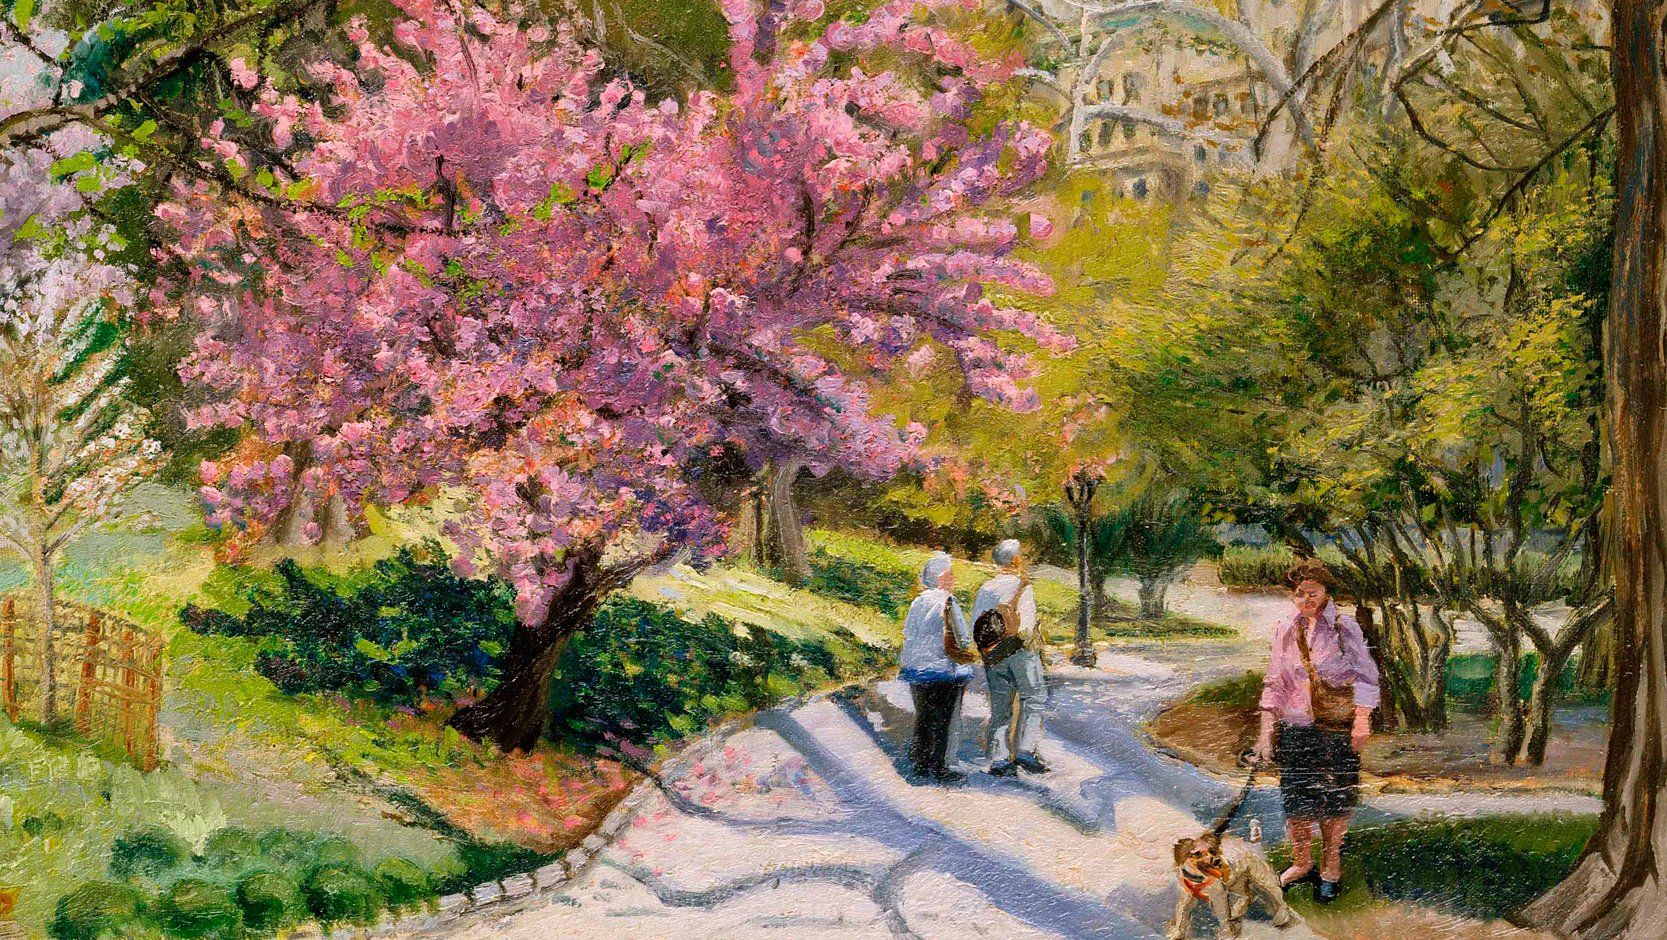 J. Varriano, American Artist Landscape Oil Painting: Cherry Blossom